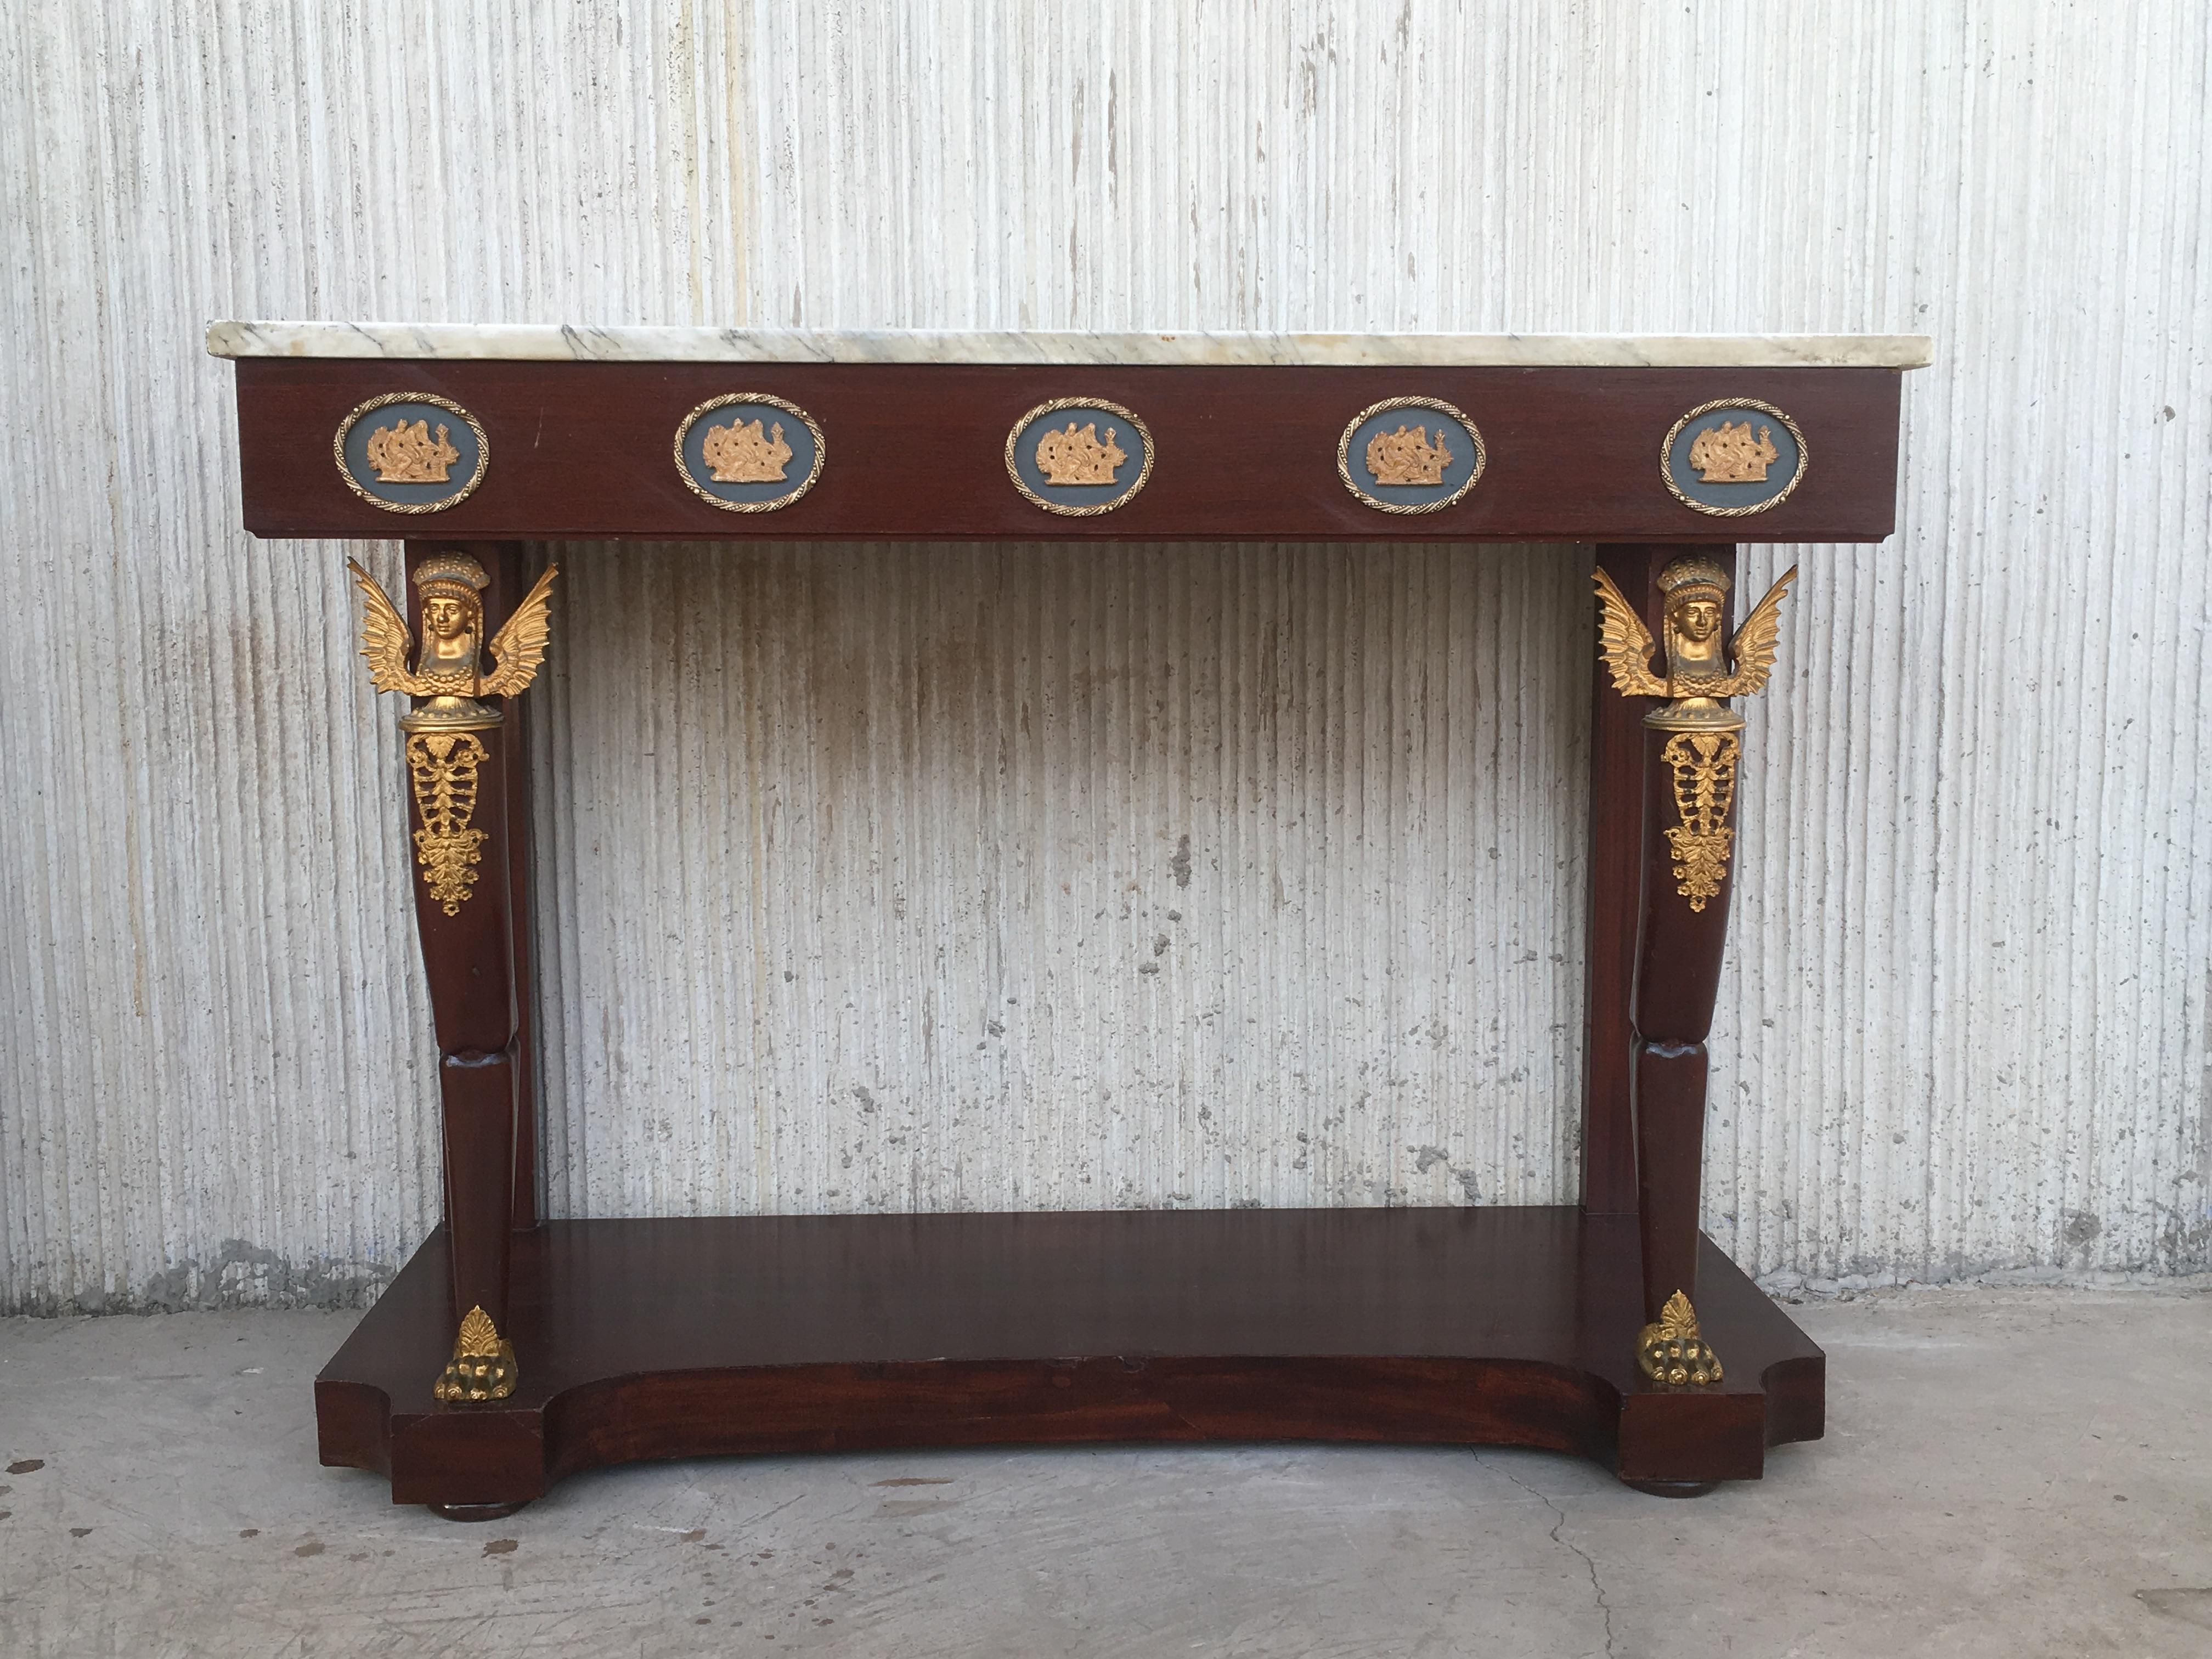 Napoleon III French Ormolu-Mounted Console Table with Marble Top, 19th Century